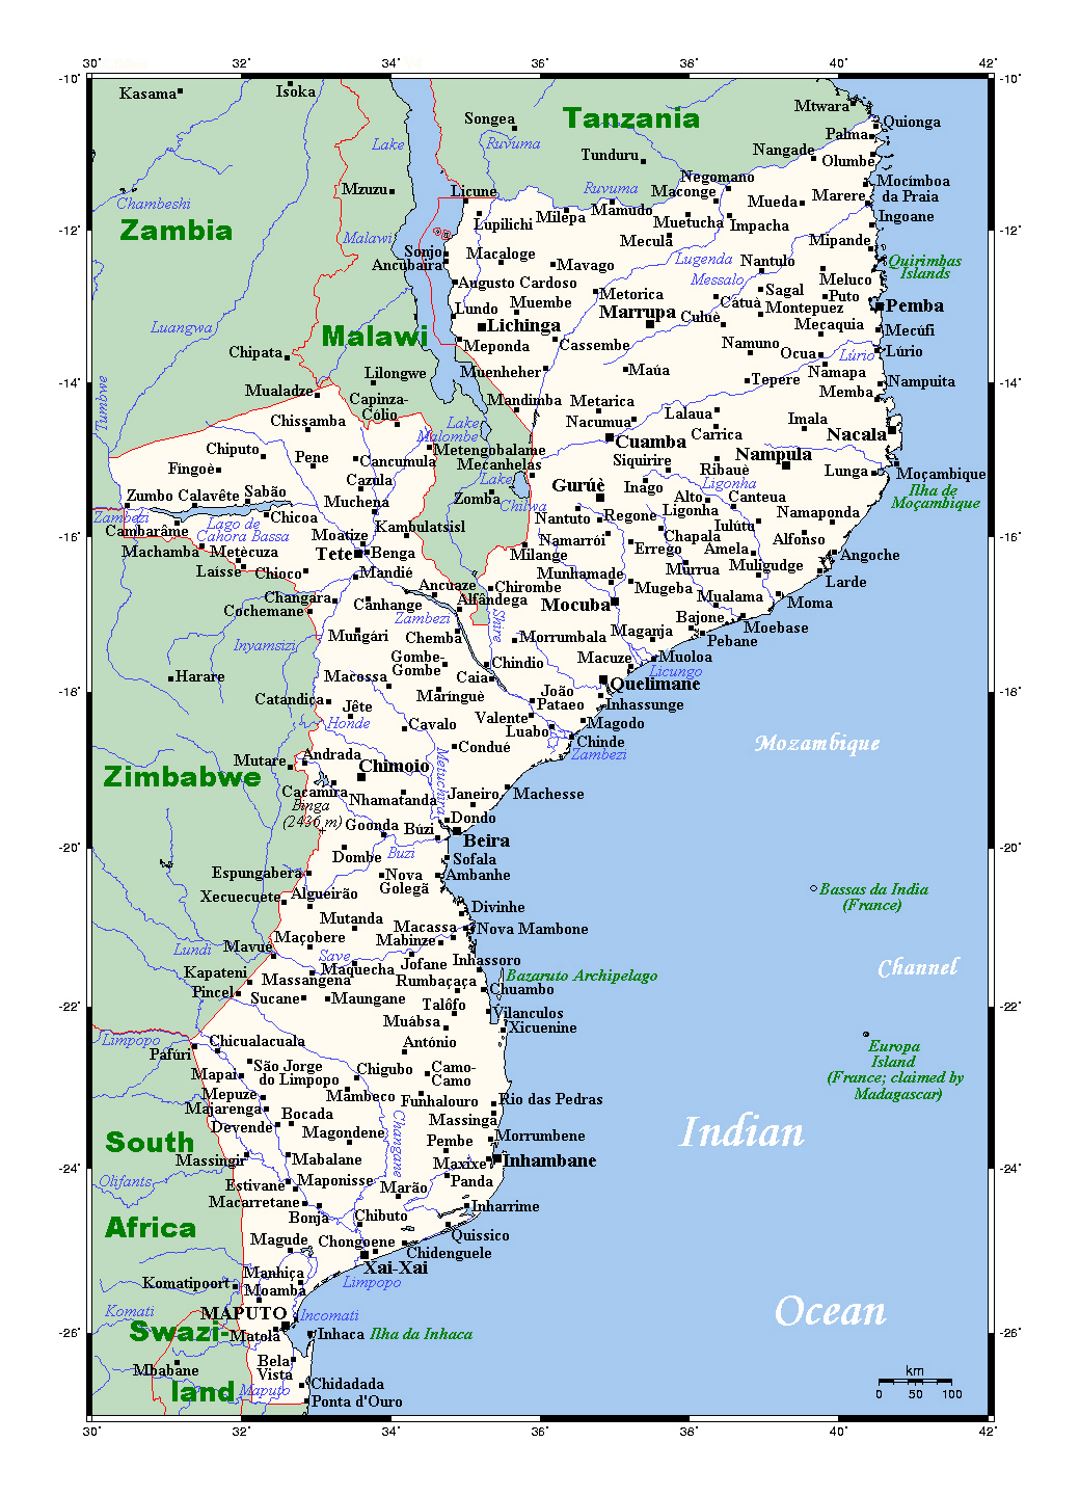 Detailed map of Mozambique with cities